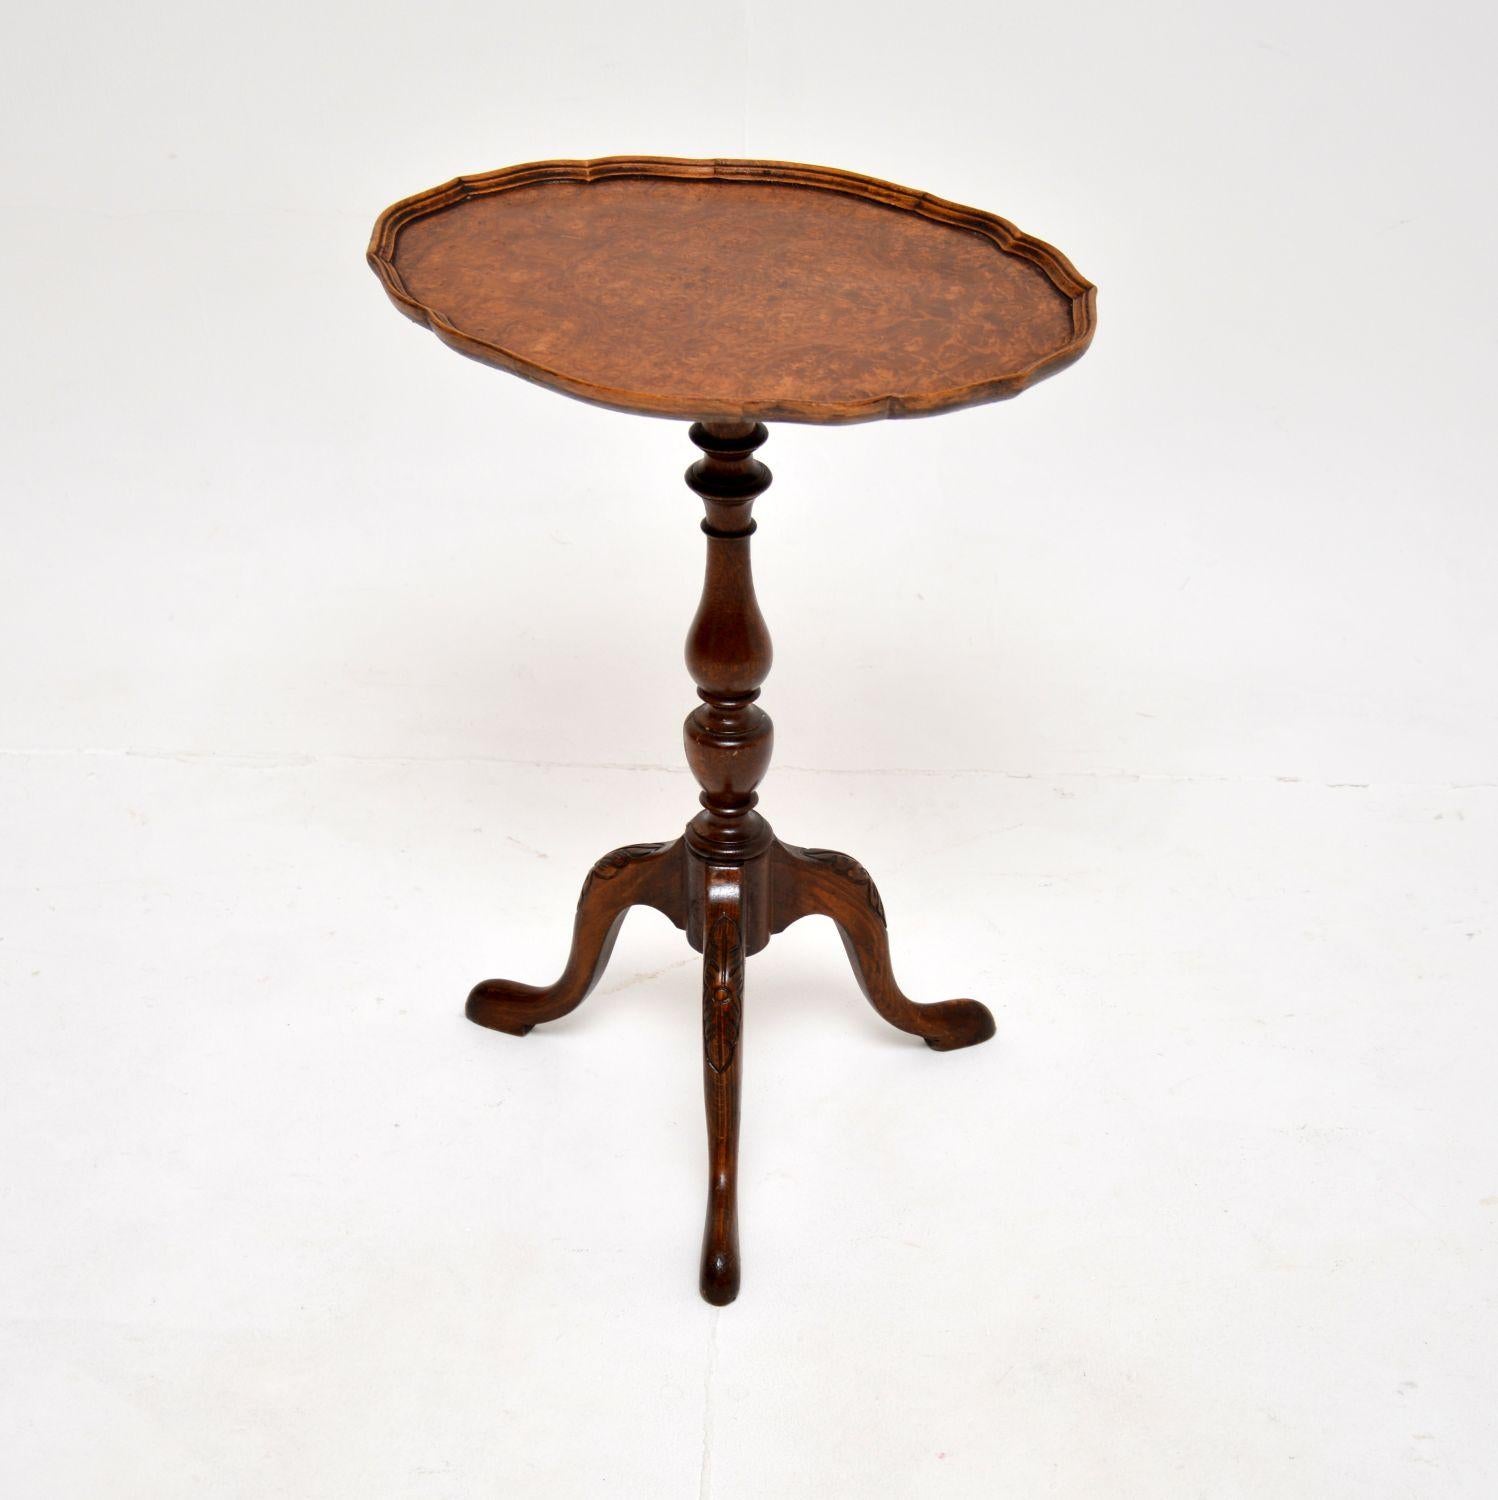 A beautiful and very well made antique burr walnut pie crust wine table. This was made in England, it dates from around the 1930’s period.

It is of very fine quality and is a lovely size to be placed in various settings around the home. The oval